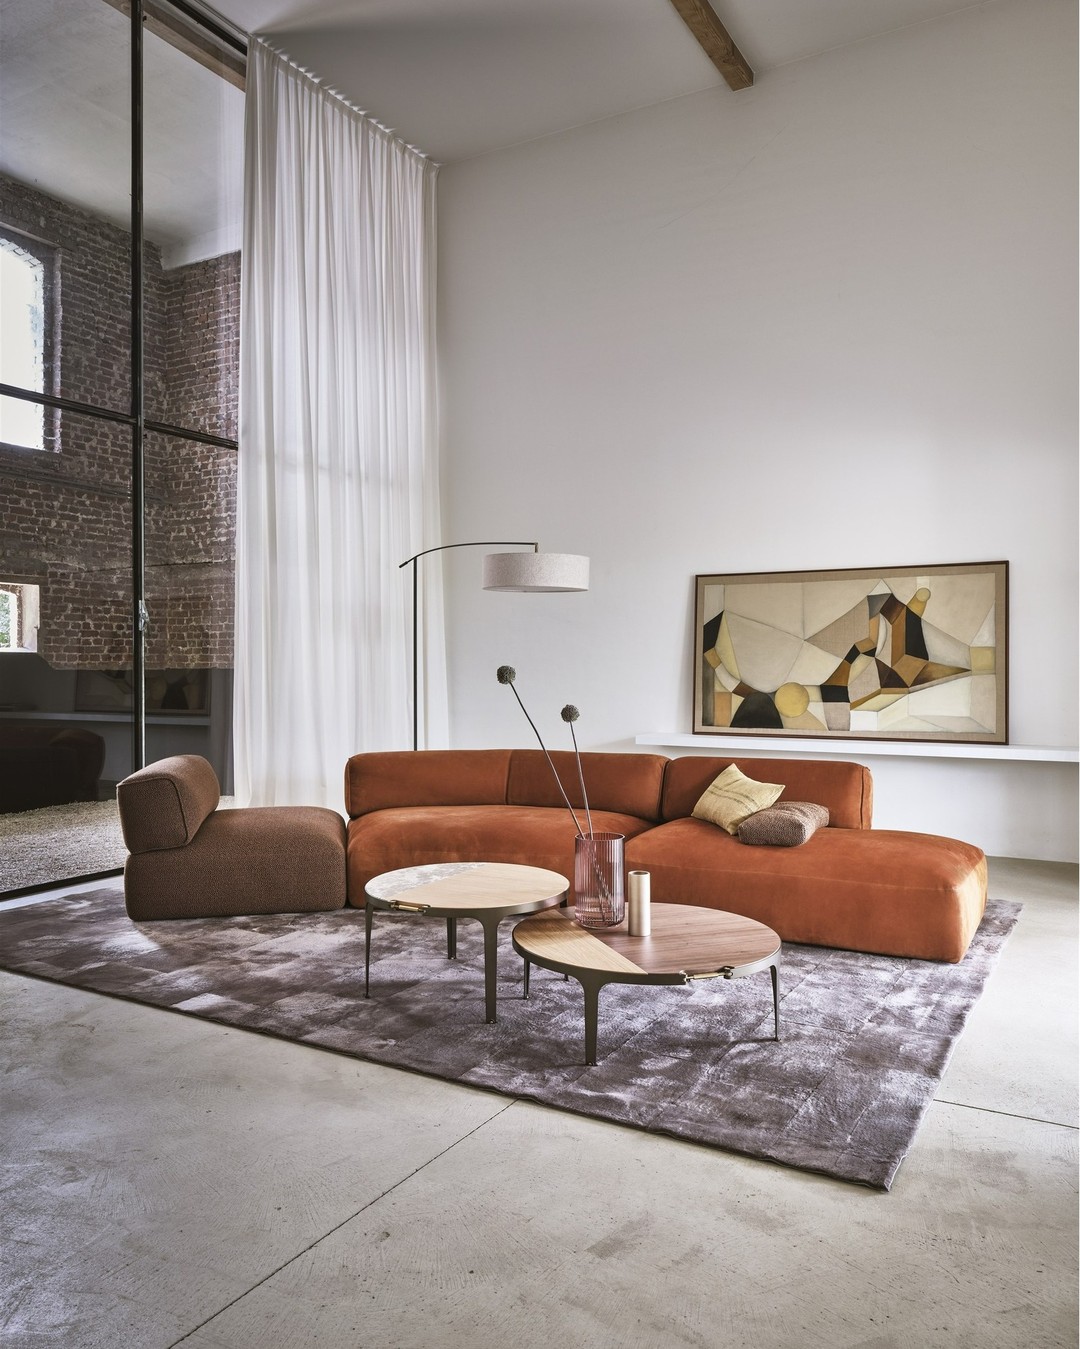 ‘Gilbert' gives you the opportunity to design your own sofa. It allows people to sit at an angle and invites you in for a proper talk. Of course, spending hours lounging in silence with a good book is also an option. Comfort, flexibility and individuality – ‘Gilbert’ has it all. 

Designed by Sebastian Herkner.

#linteloo #modular  #sofa #gilbert #sebastianherkner #clamp #coffeetable #sjoerdvroonland #interior #design